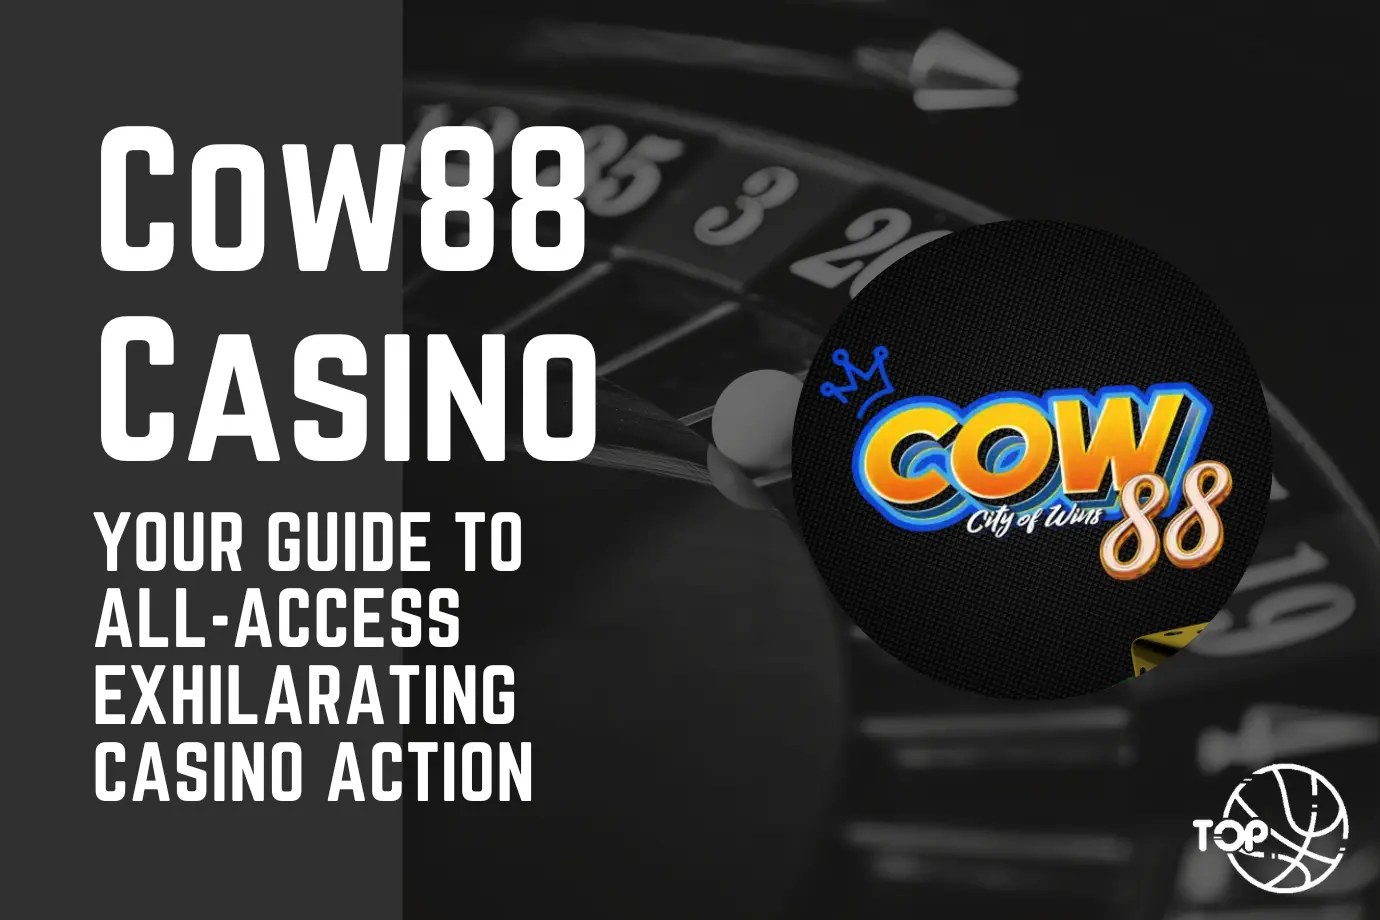 Cow88 Casino Your Guide to All-Access Exhilarating Casino Action